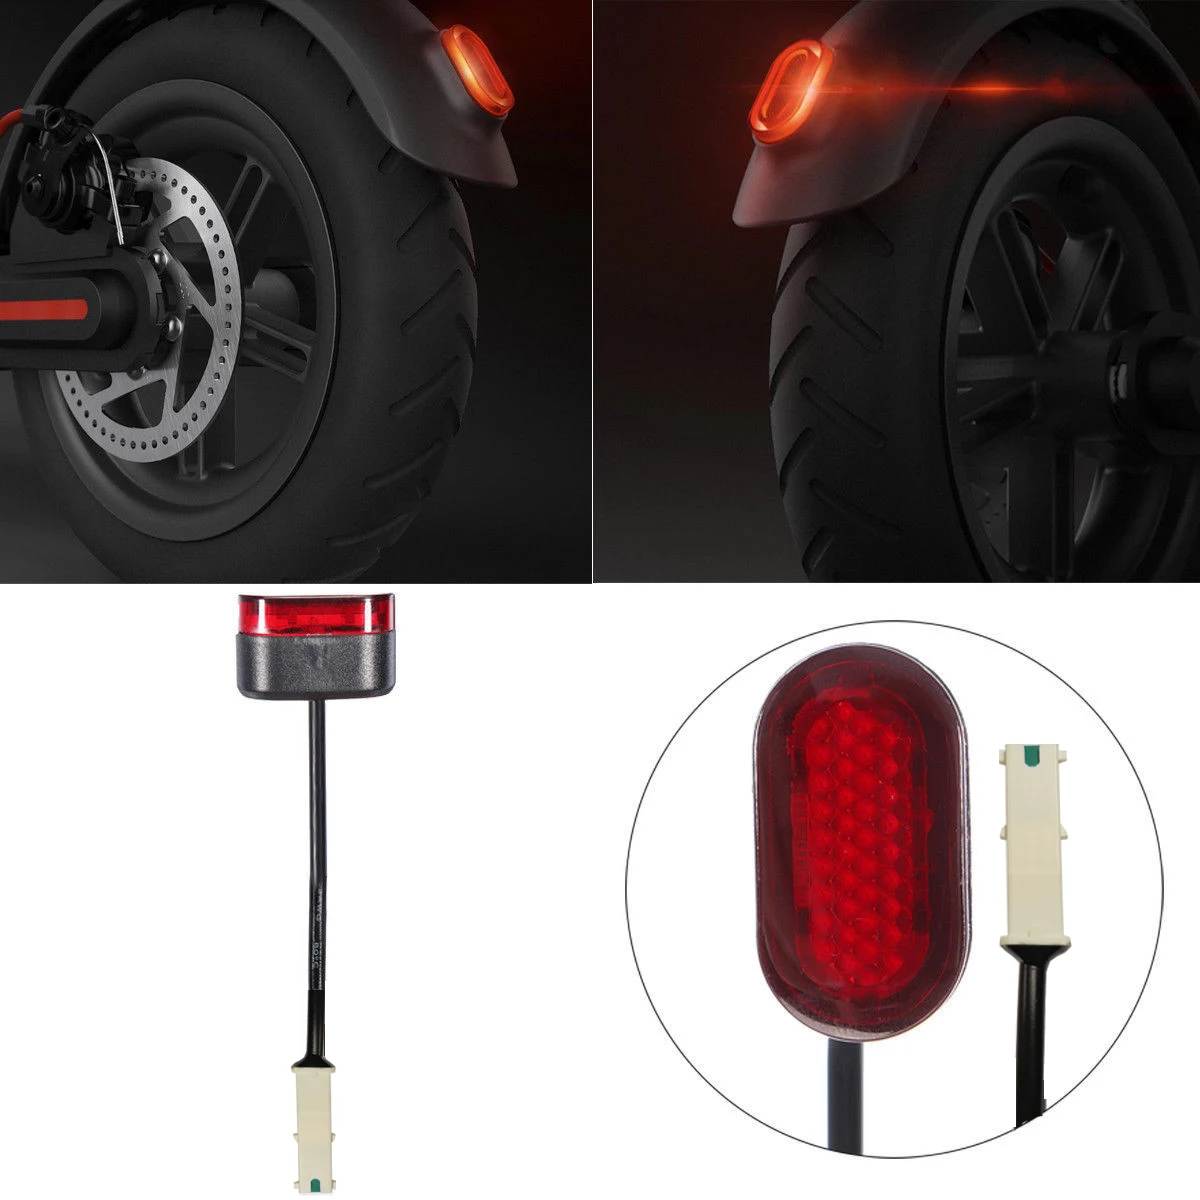 M365 Tail Light with Line Stoplight Scooter Safety Brake Warning Rear Lamp